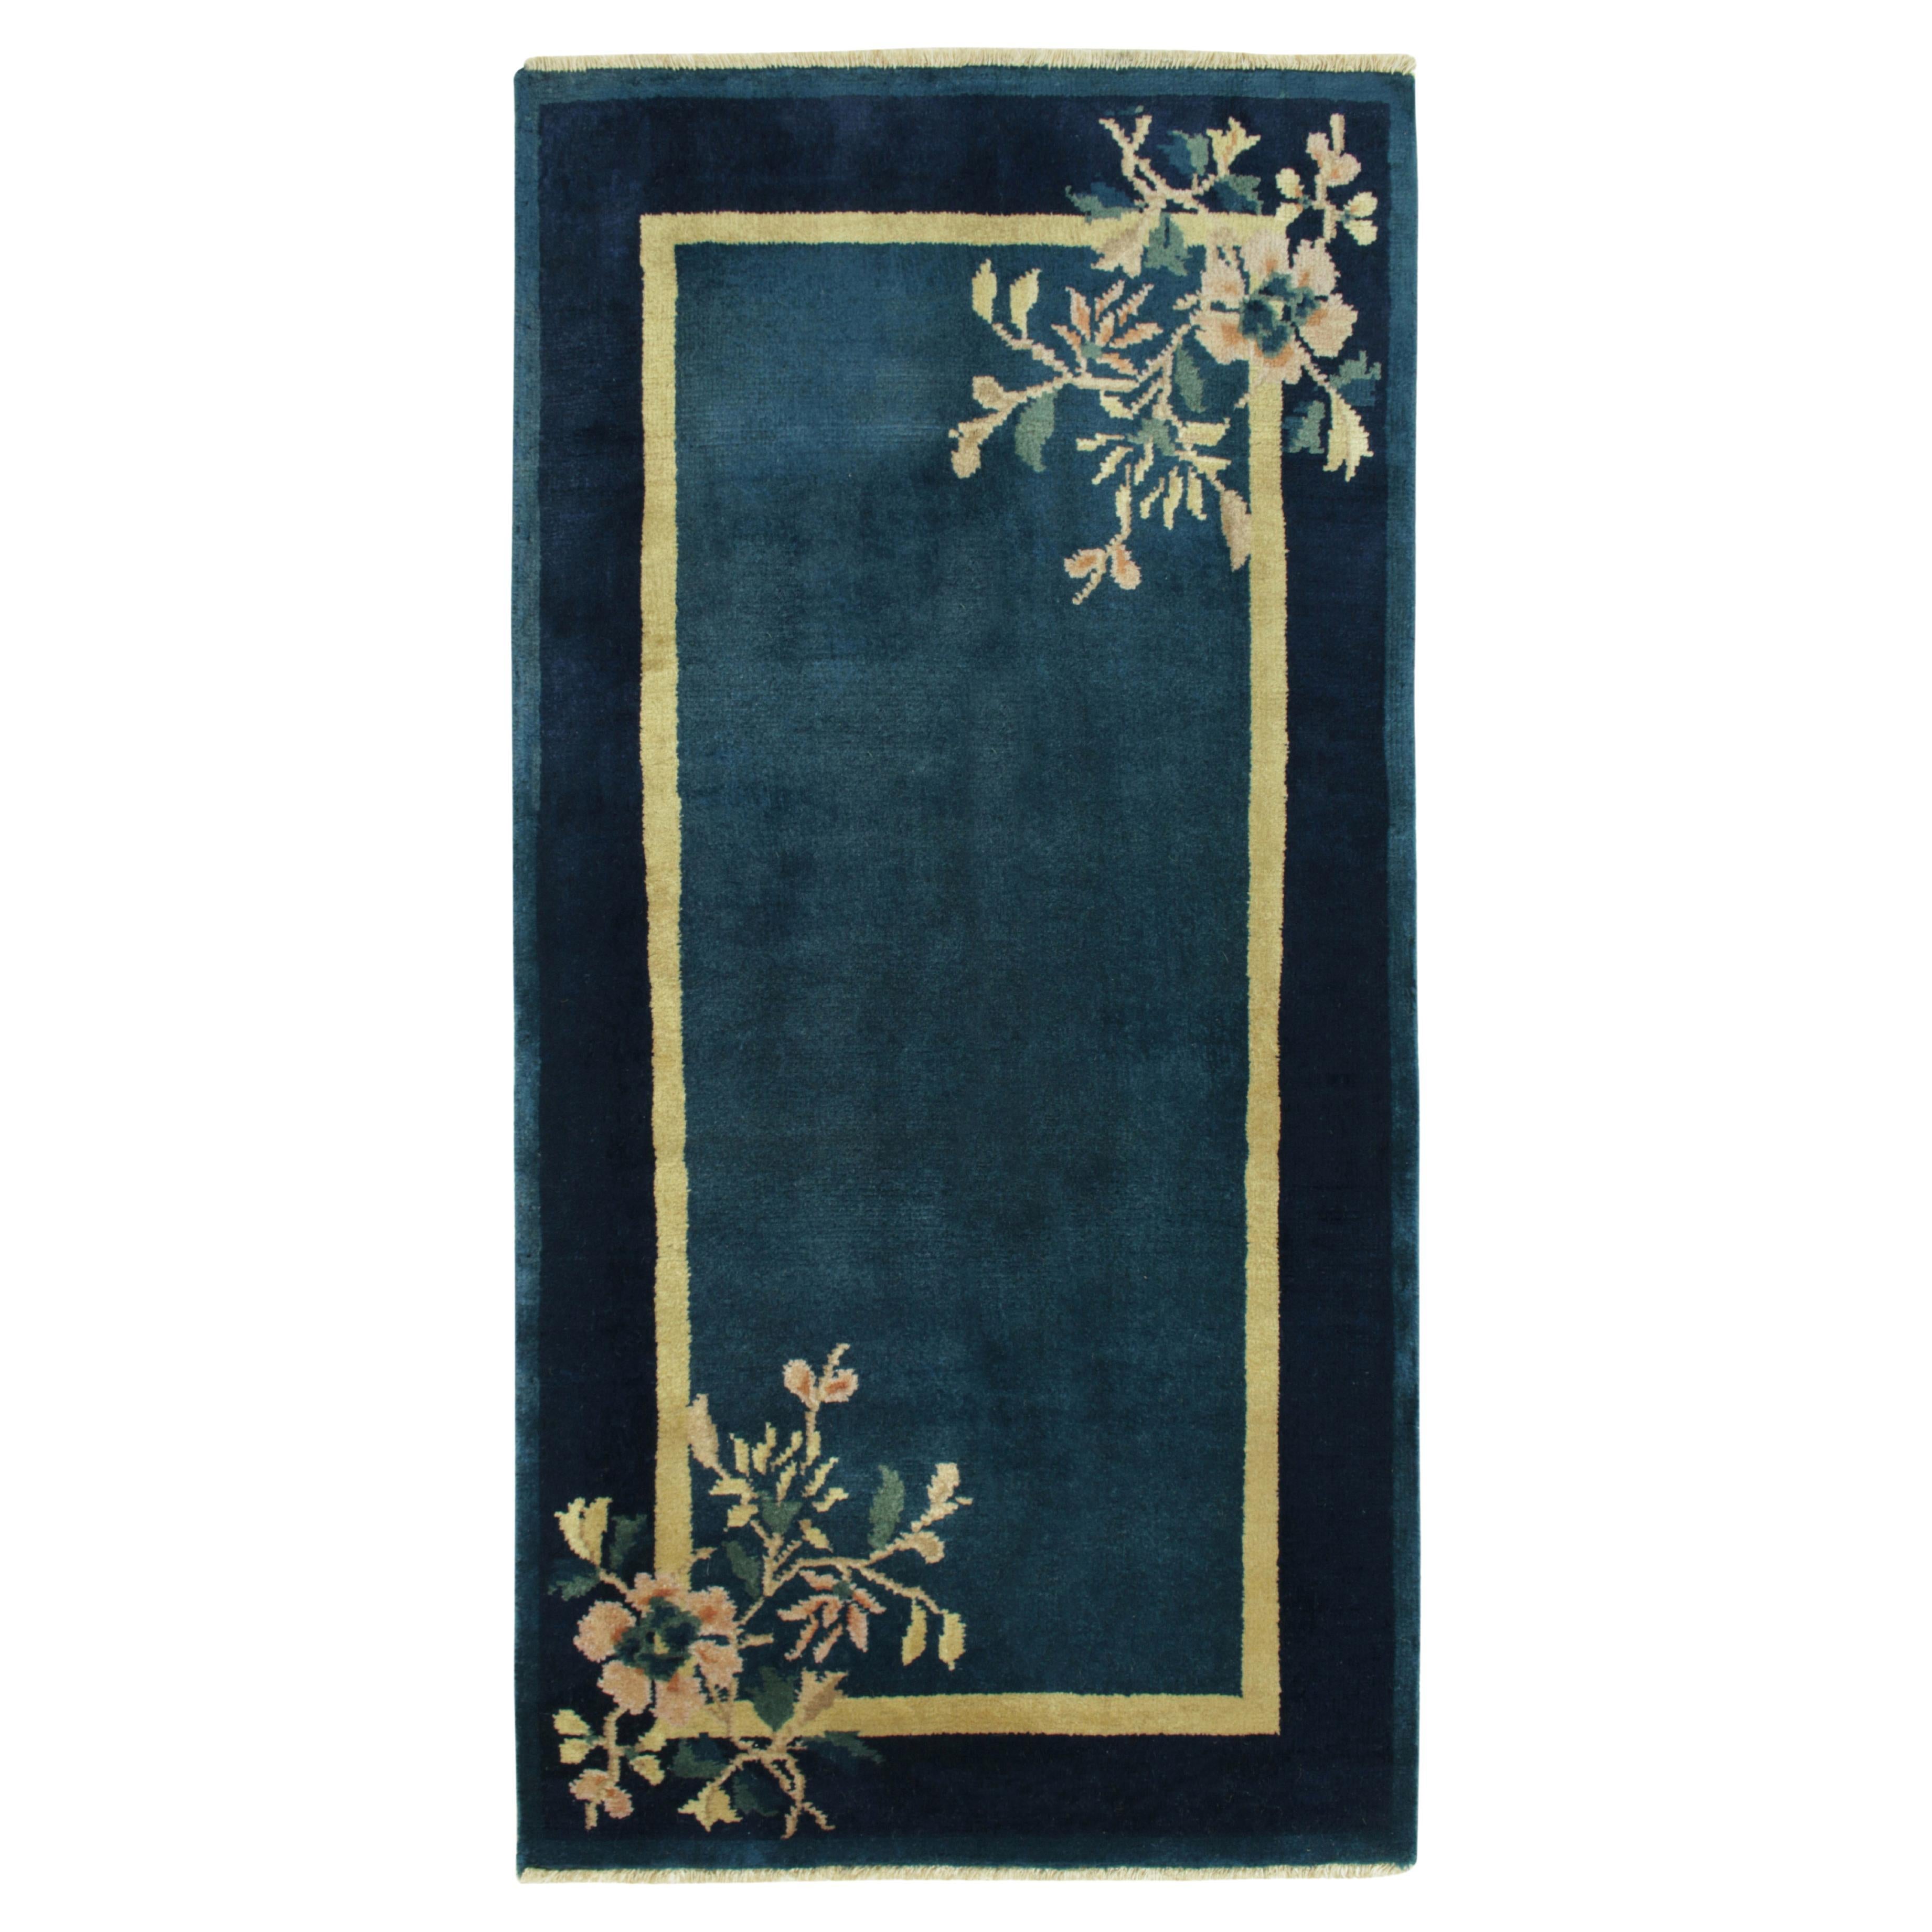 Vintage Chinese Deco Style Rug in Deep Blue, Gold, Floral Pattern by Rug & Kilim